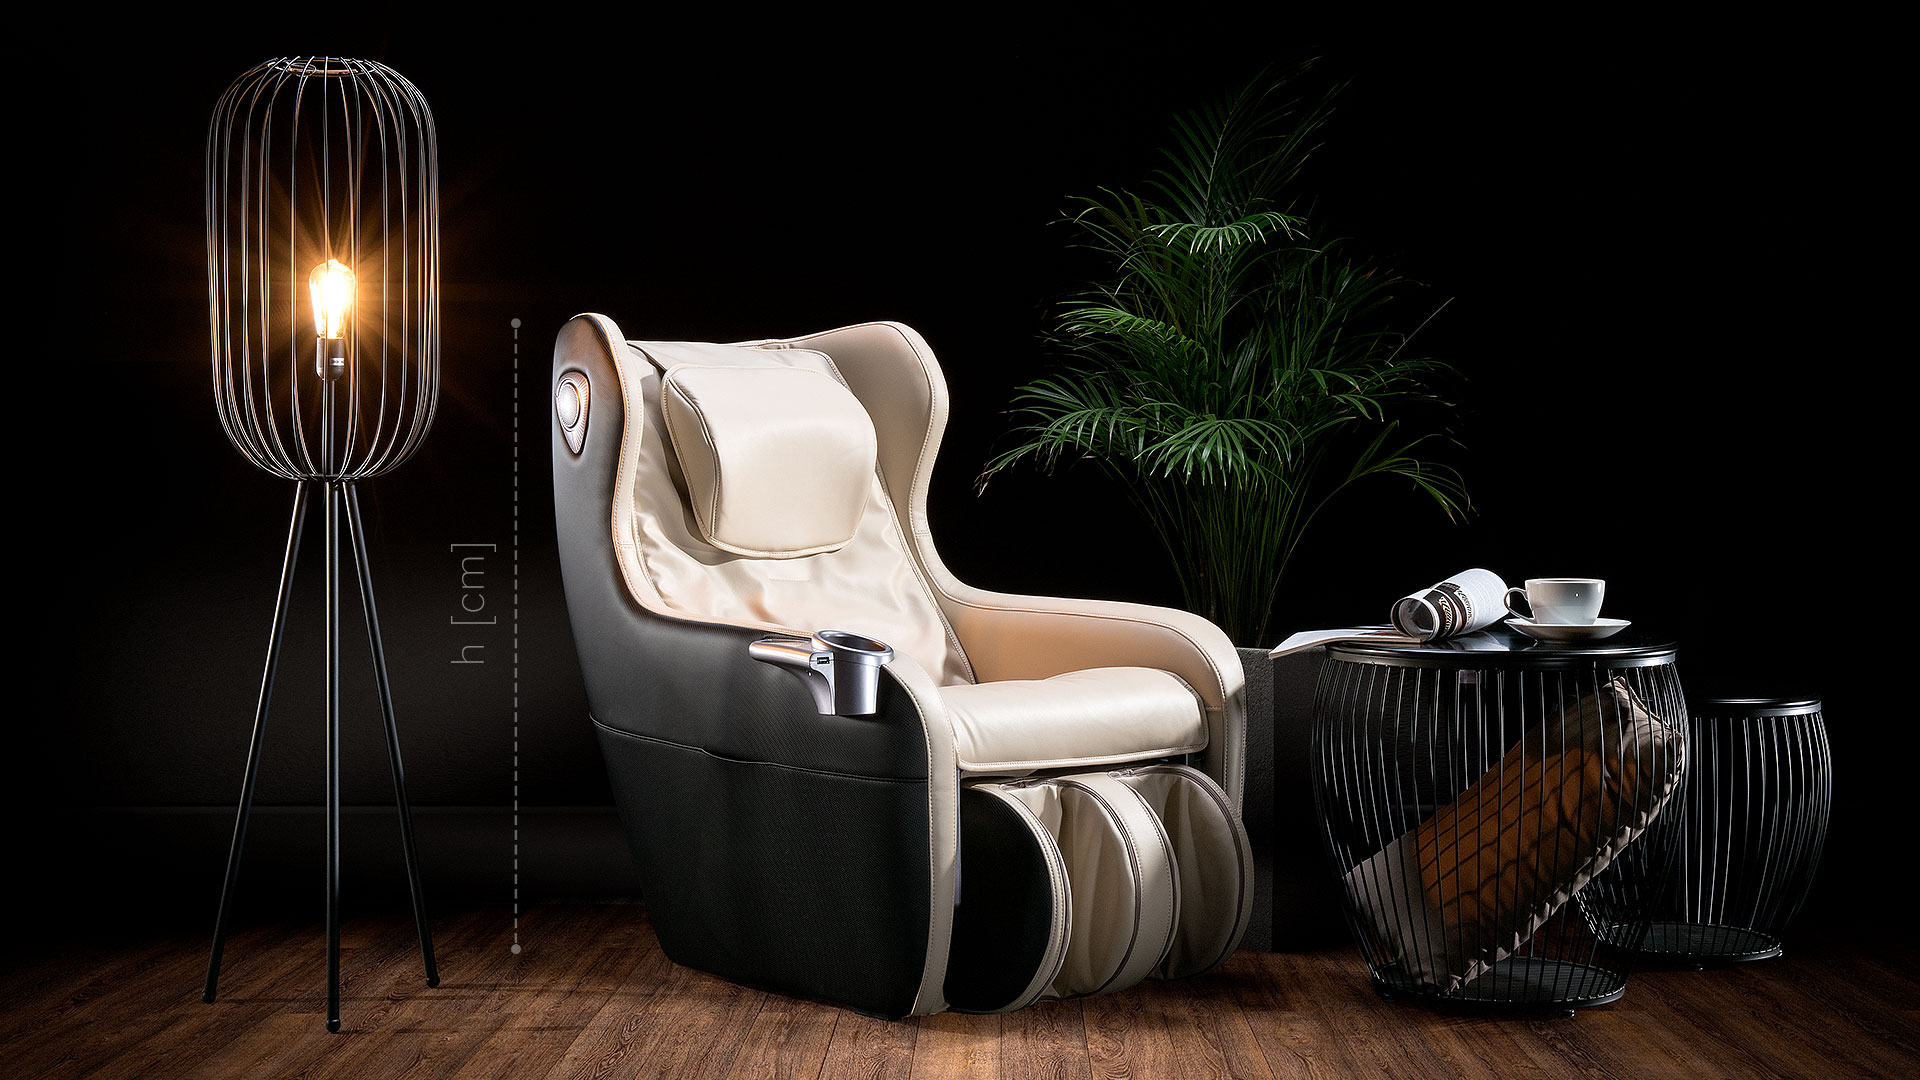 massage chair Massaggio Ricco in numbers